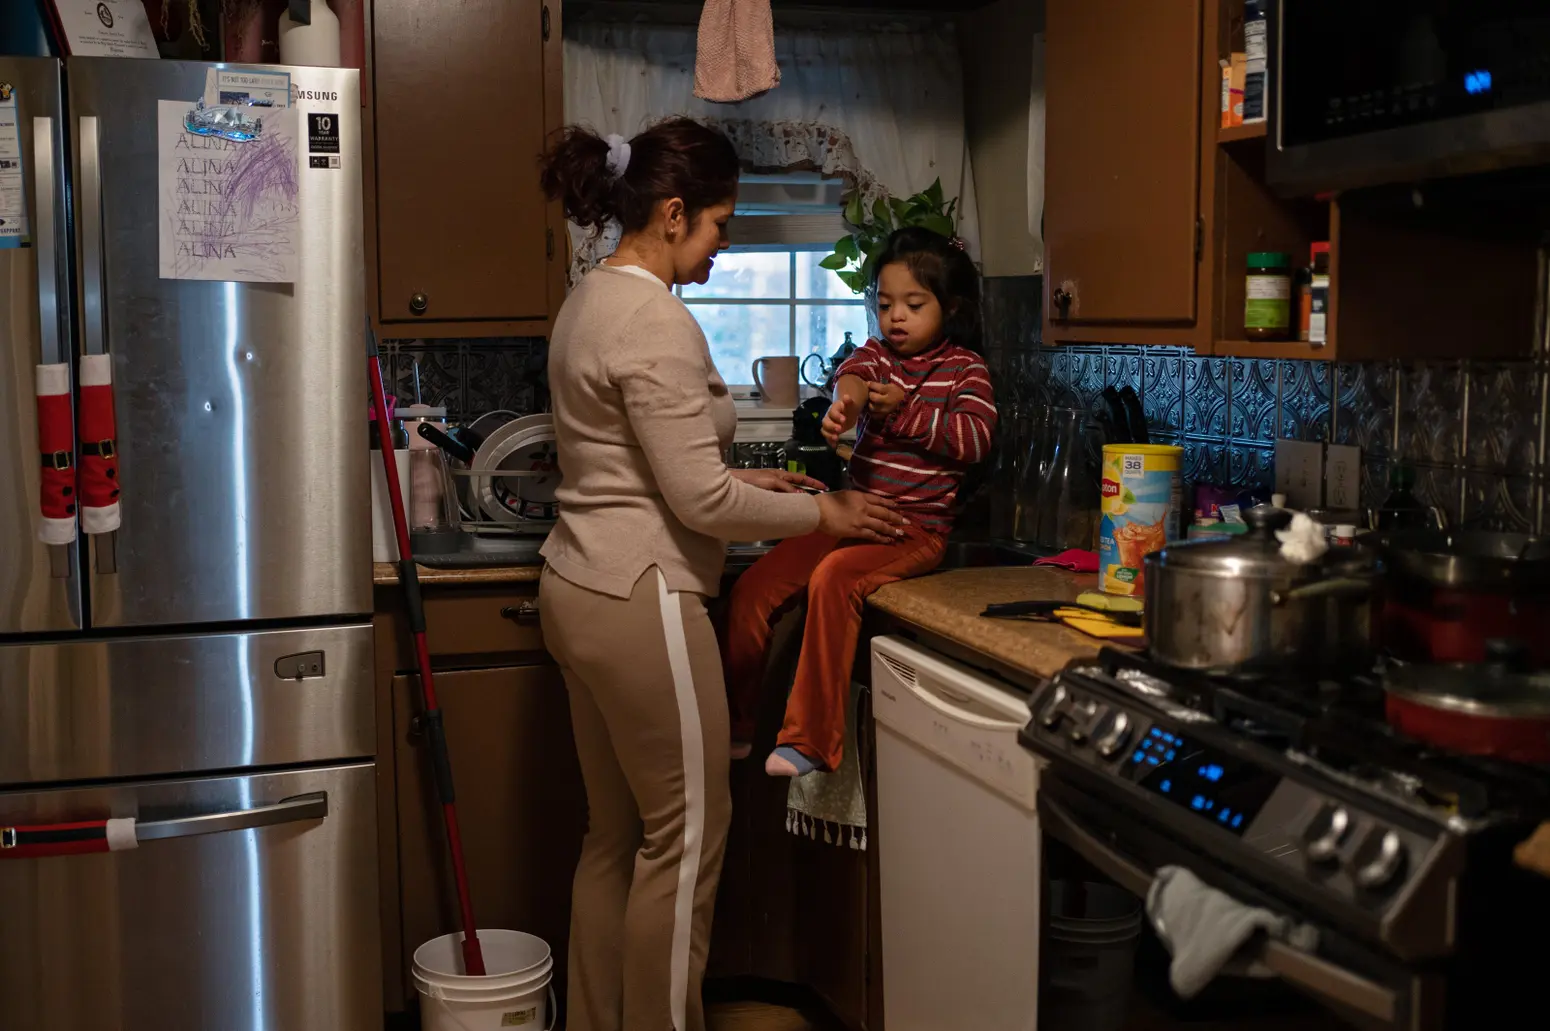 Cristina Lazo starts the daily routine of washing her daughter Alina’s hands, changing clothes and rubbing an ointment on her irritated eyes after coming home from the outside. Lazo believes the fumes from the nearby industrial sector are contributing to her 7-year-old daughter’s symptoms.